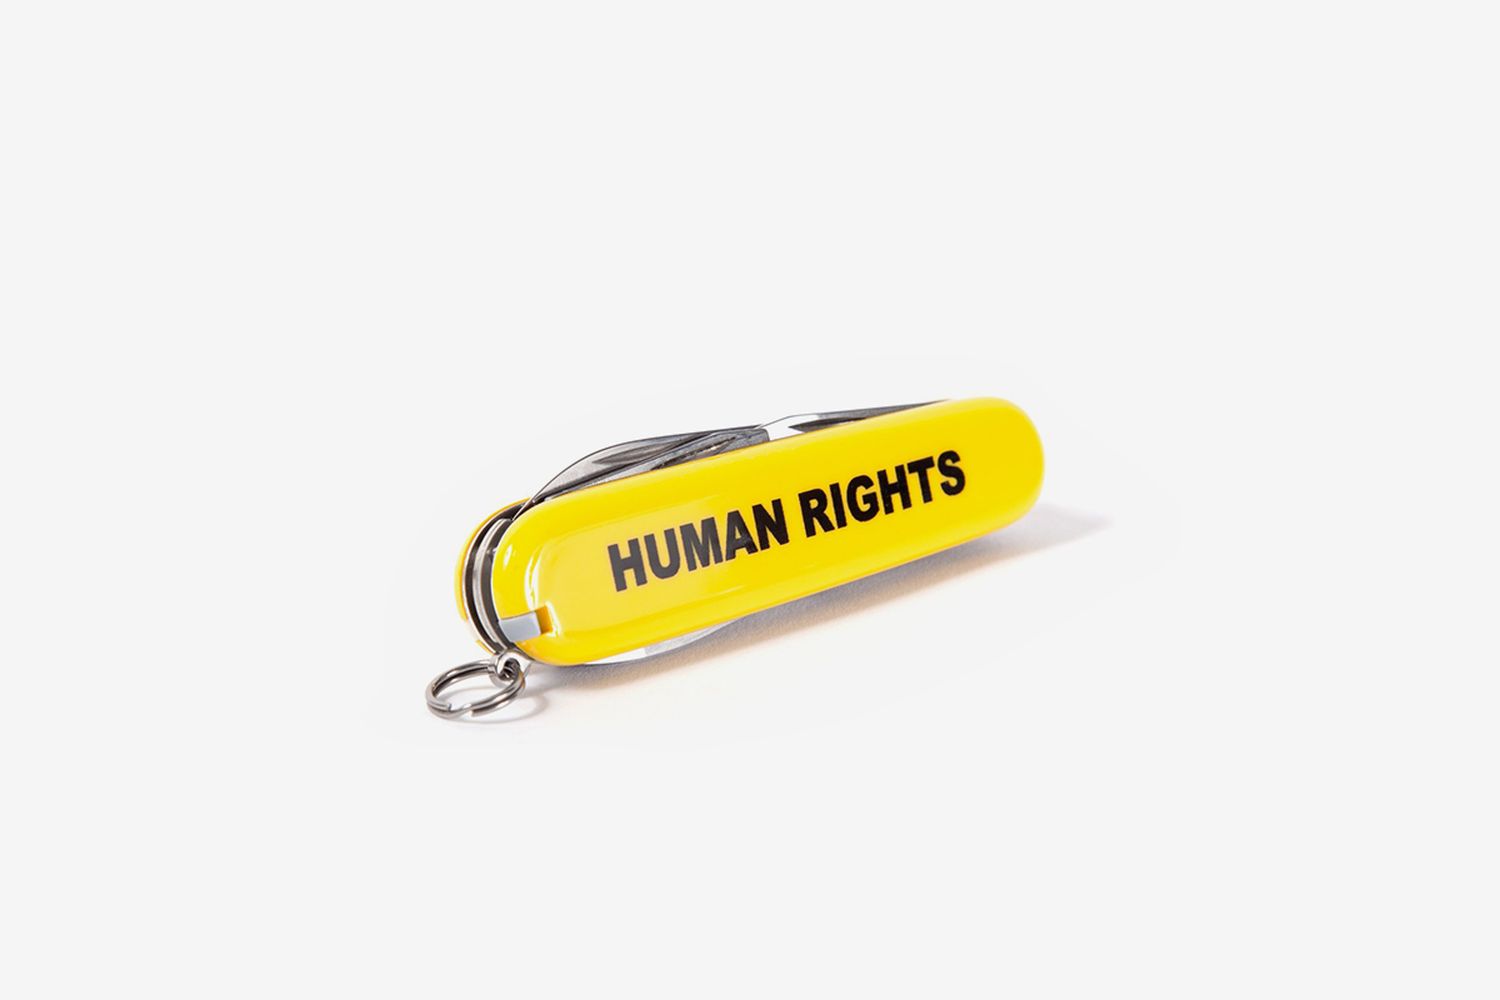 Human Rights Knife